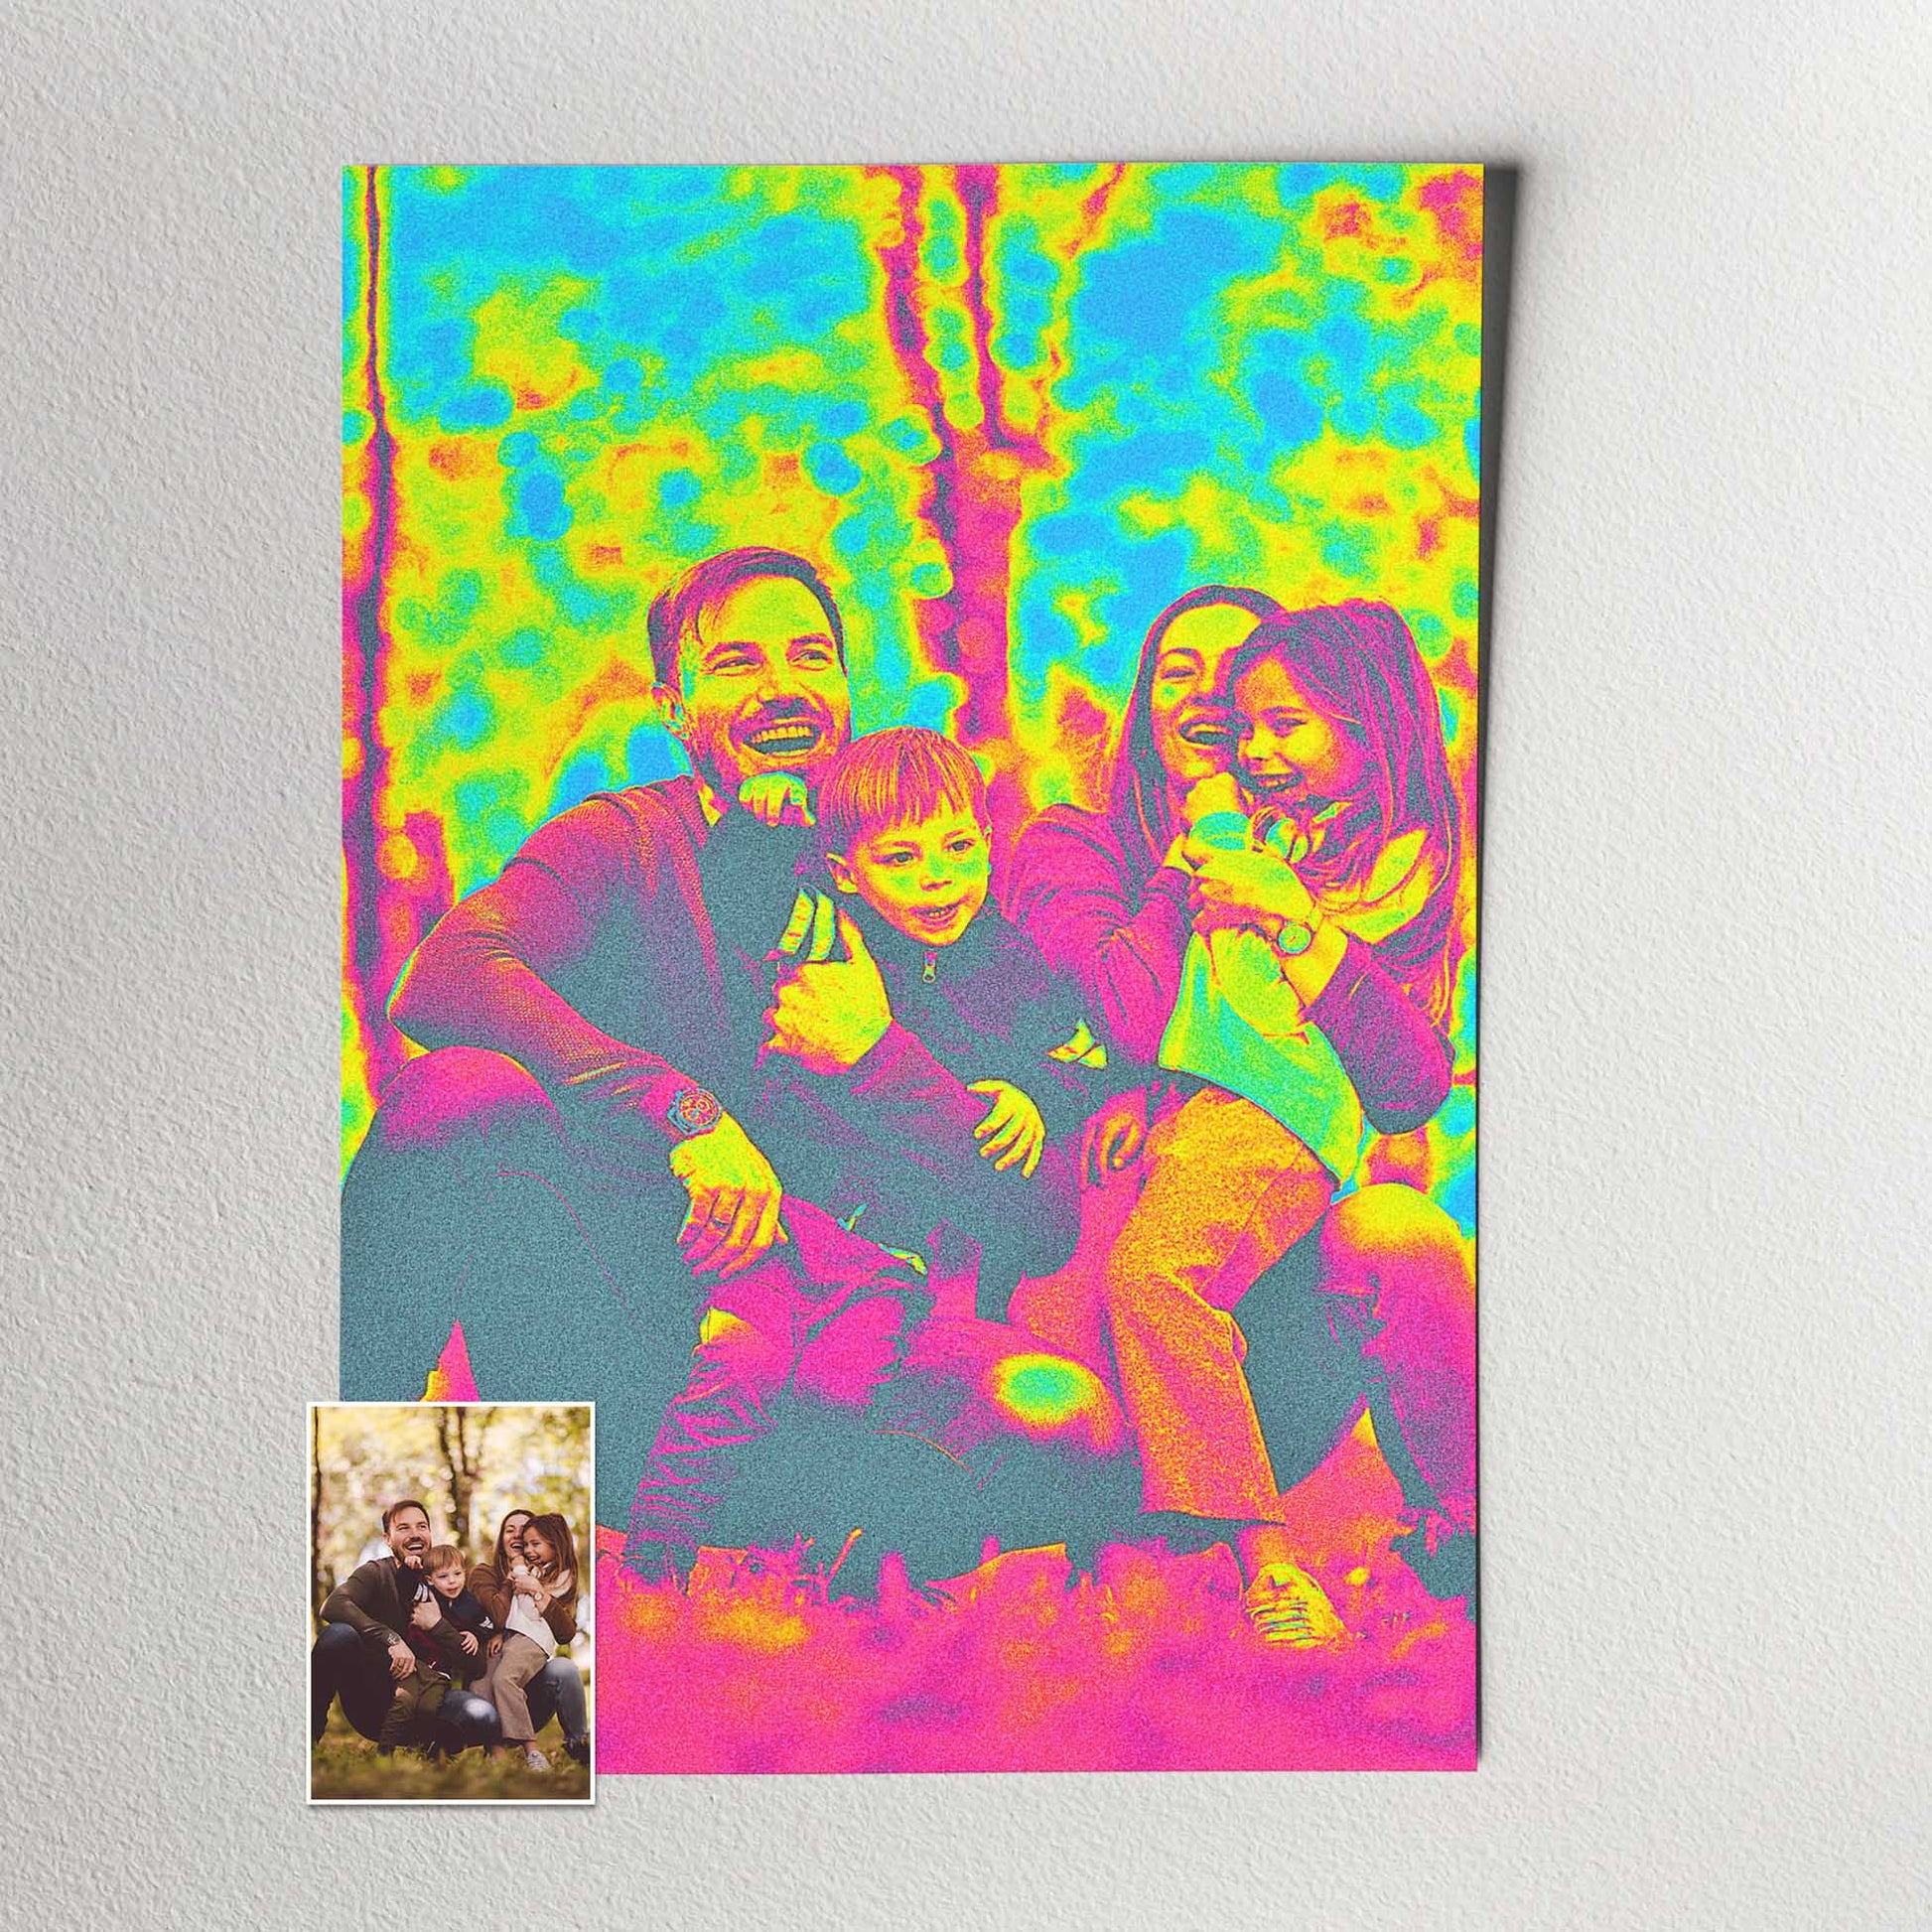 Step into a world of vibrant imagination with our Personalised Acid Trip Print. Created from your photo, it features a mesmerizing neon color effect, combining yellow, green, pink, and blue hues in a captivating display